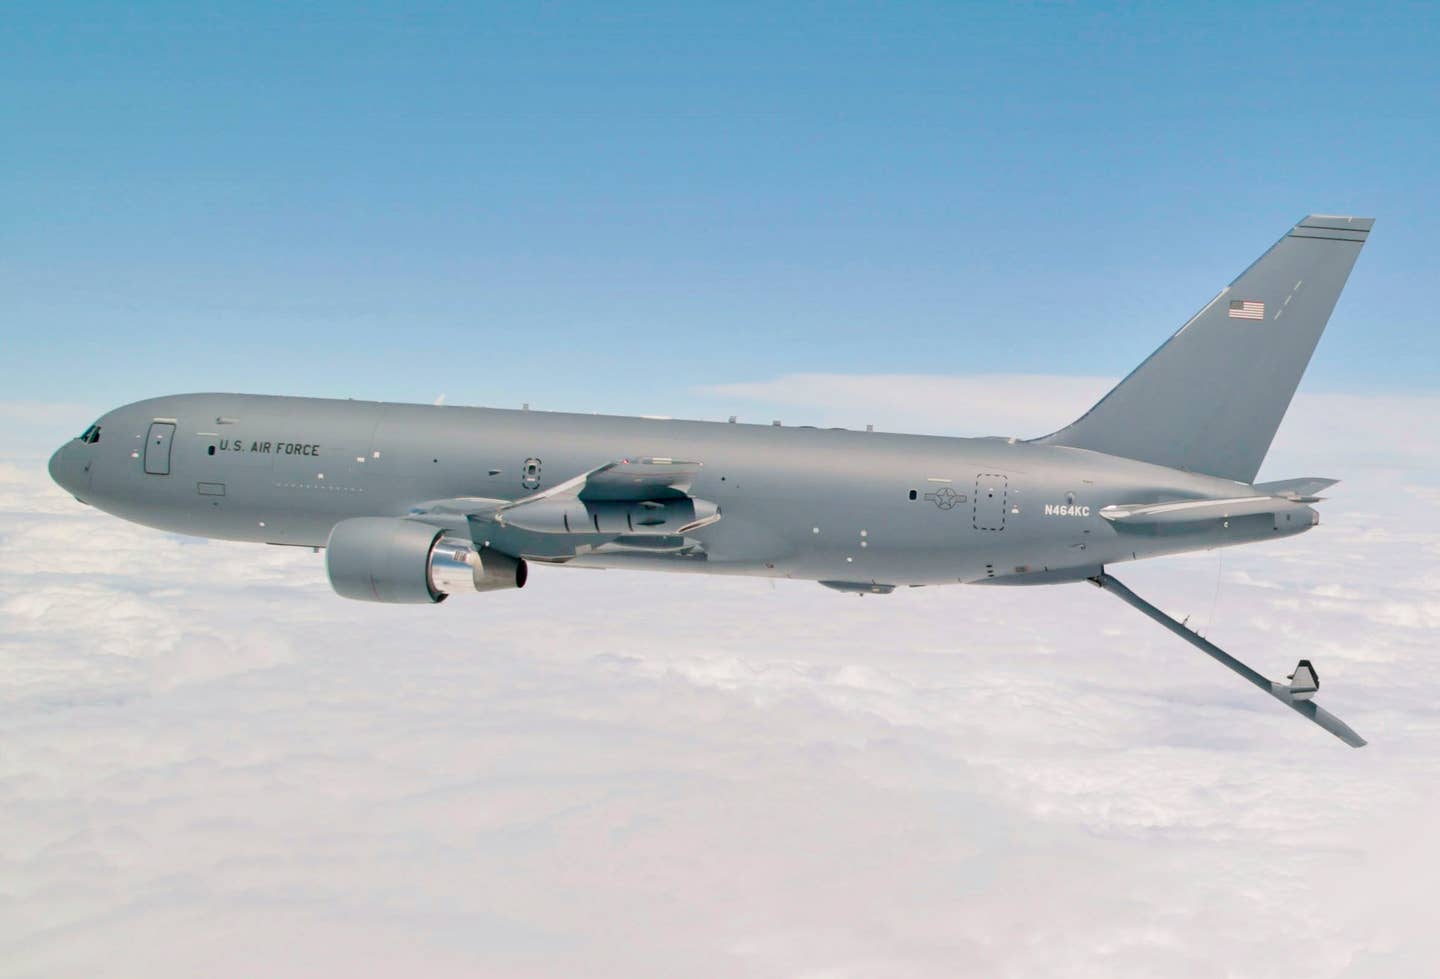 Boeing's KC-46 aerial refueling tanker conducts receiver compatibility tests with a U.S. Air Force C-17 Globemaster III from Joint Base Lewis-McChord as part of Test 003-06.<em> U.S. Air Force photo by Christopher Okula</em>